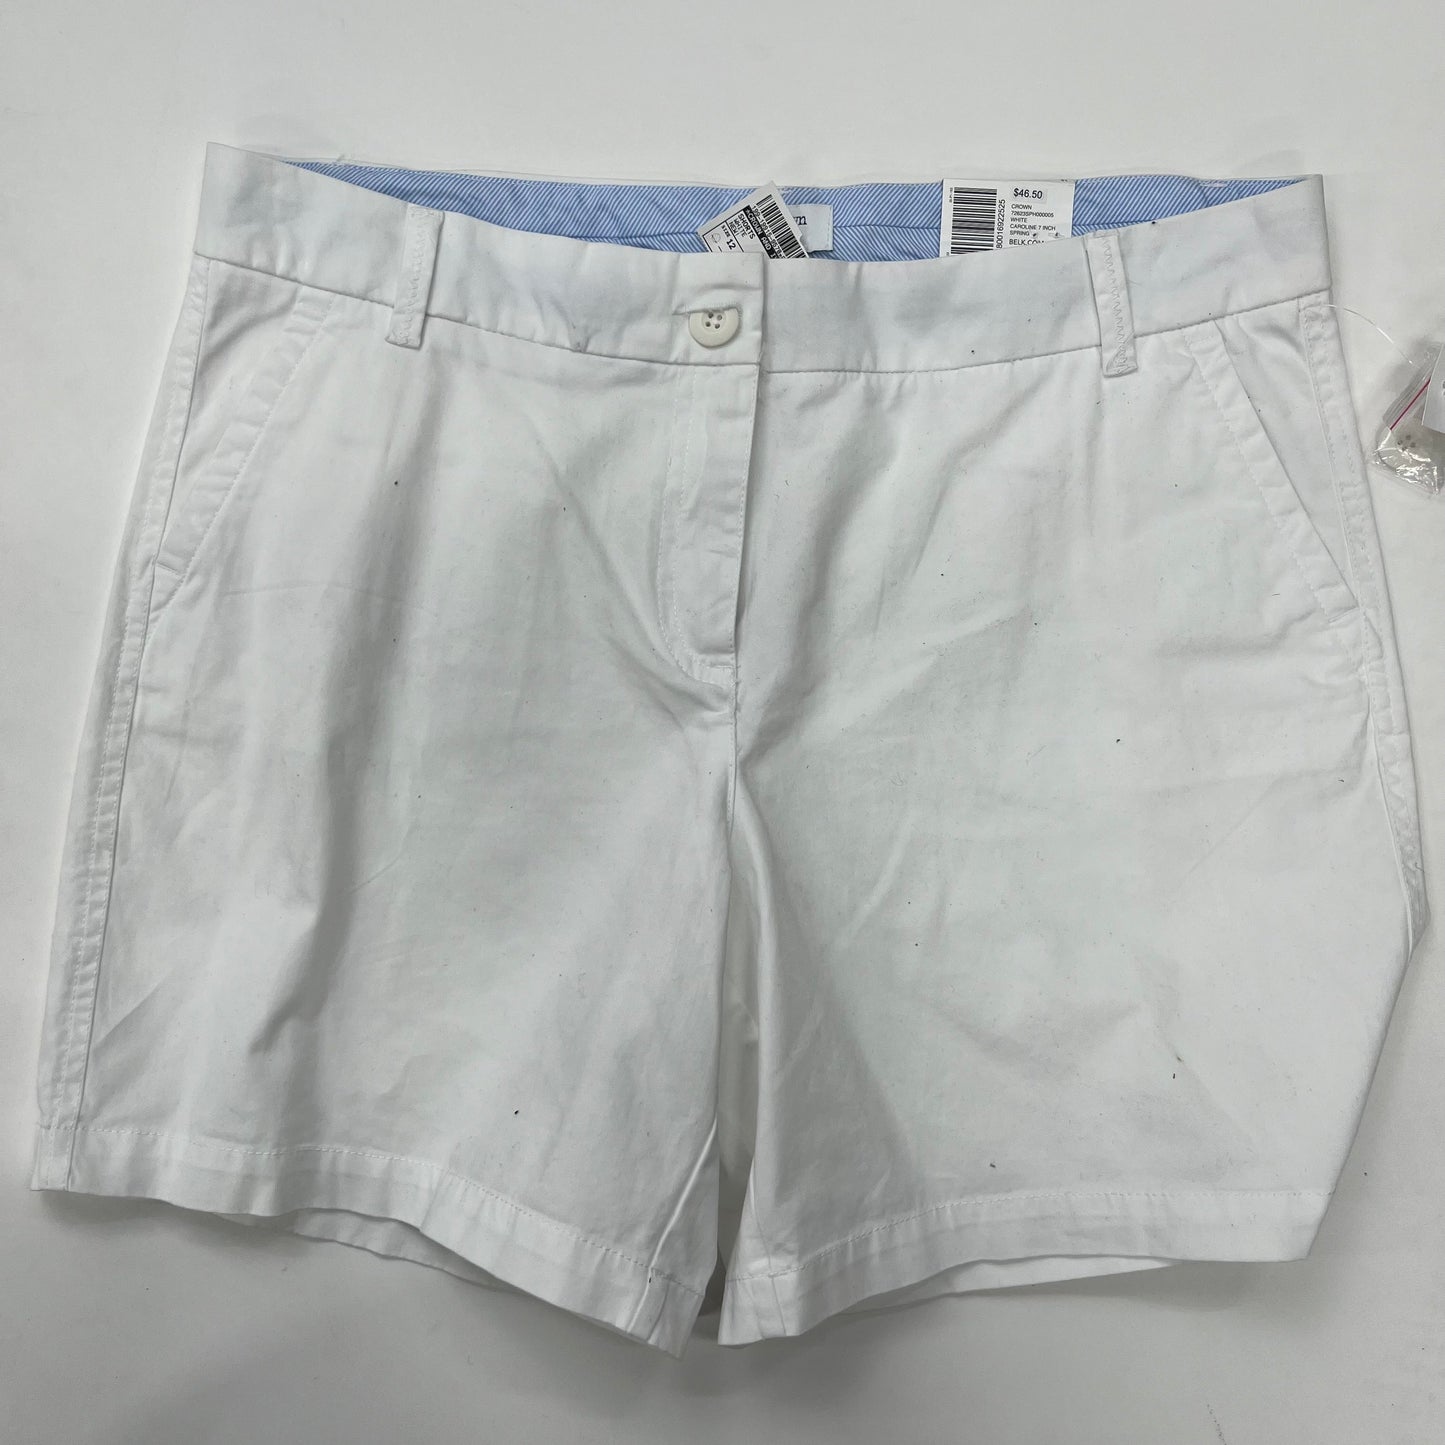 Shorts By Crown And Ivy NWT Size: 12